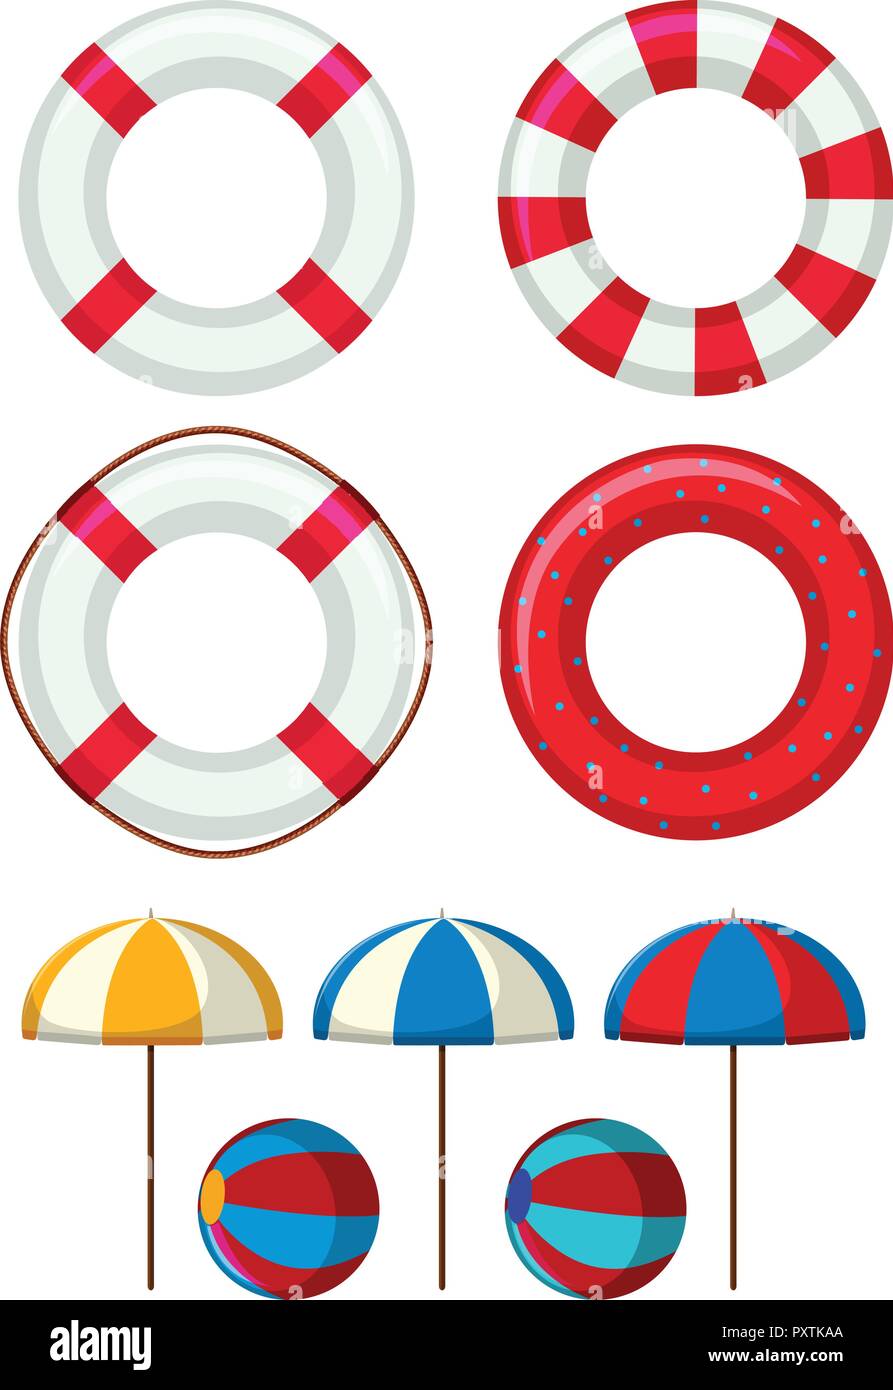 Safety rings and other beach elements illustration Stock Vector